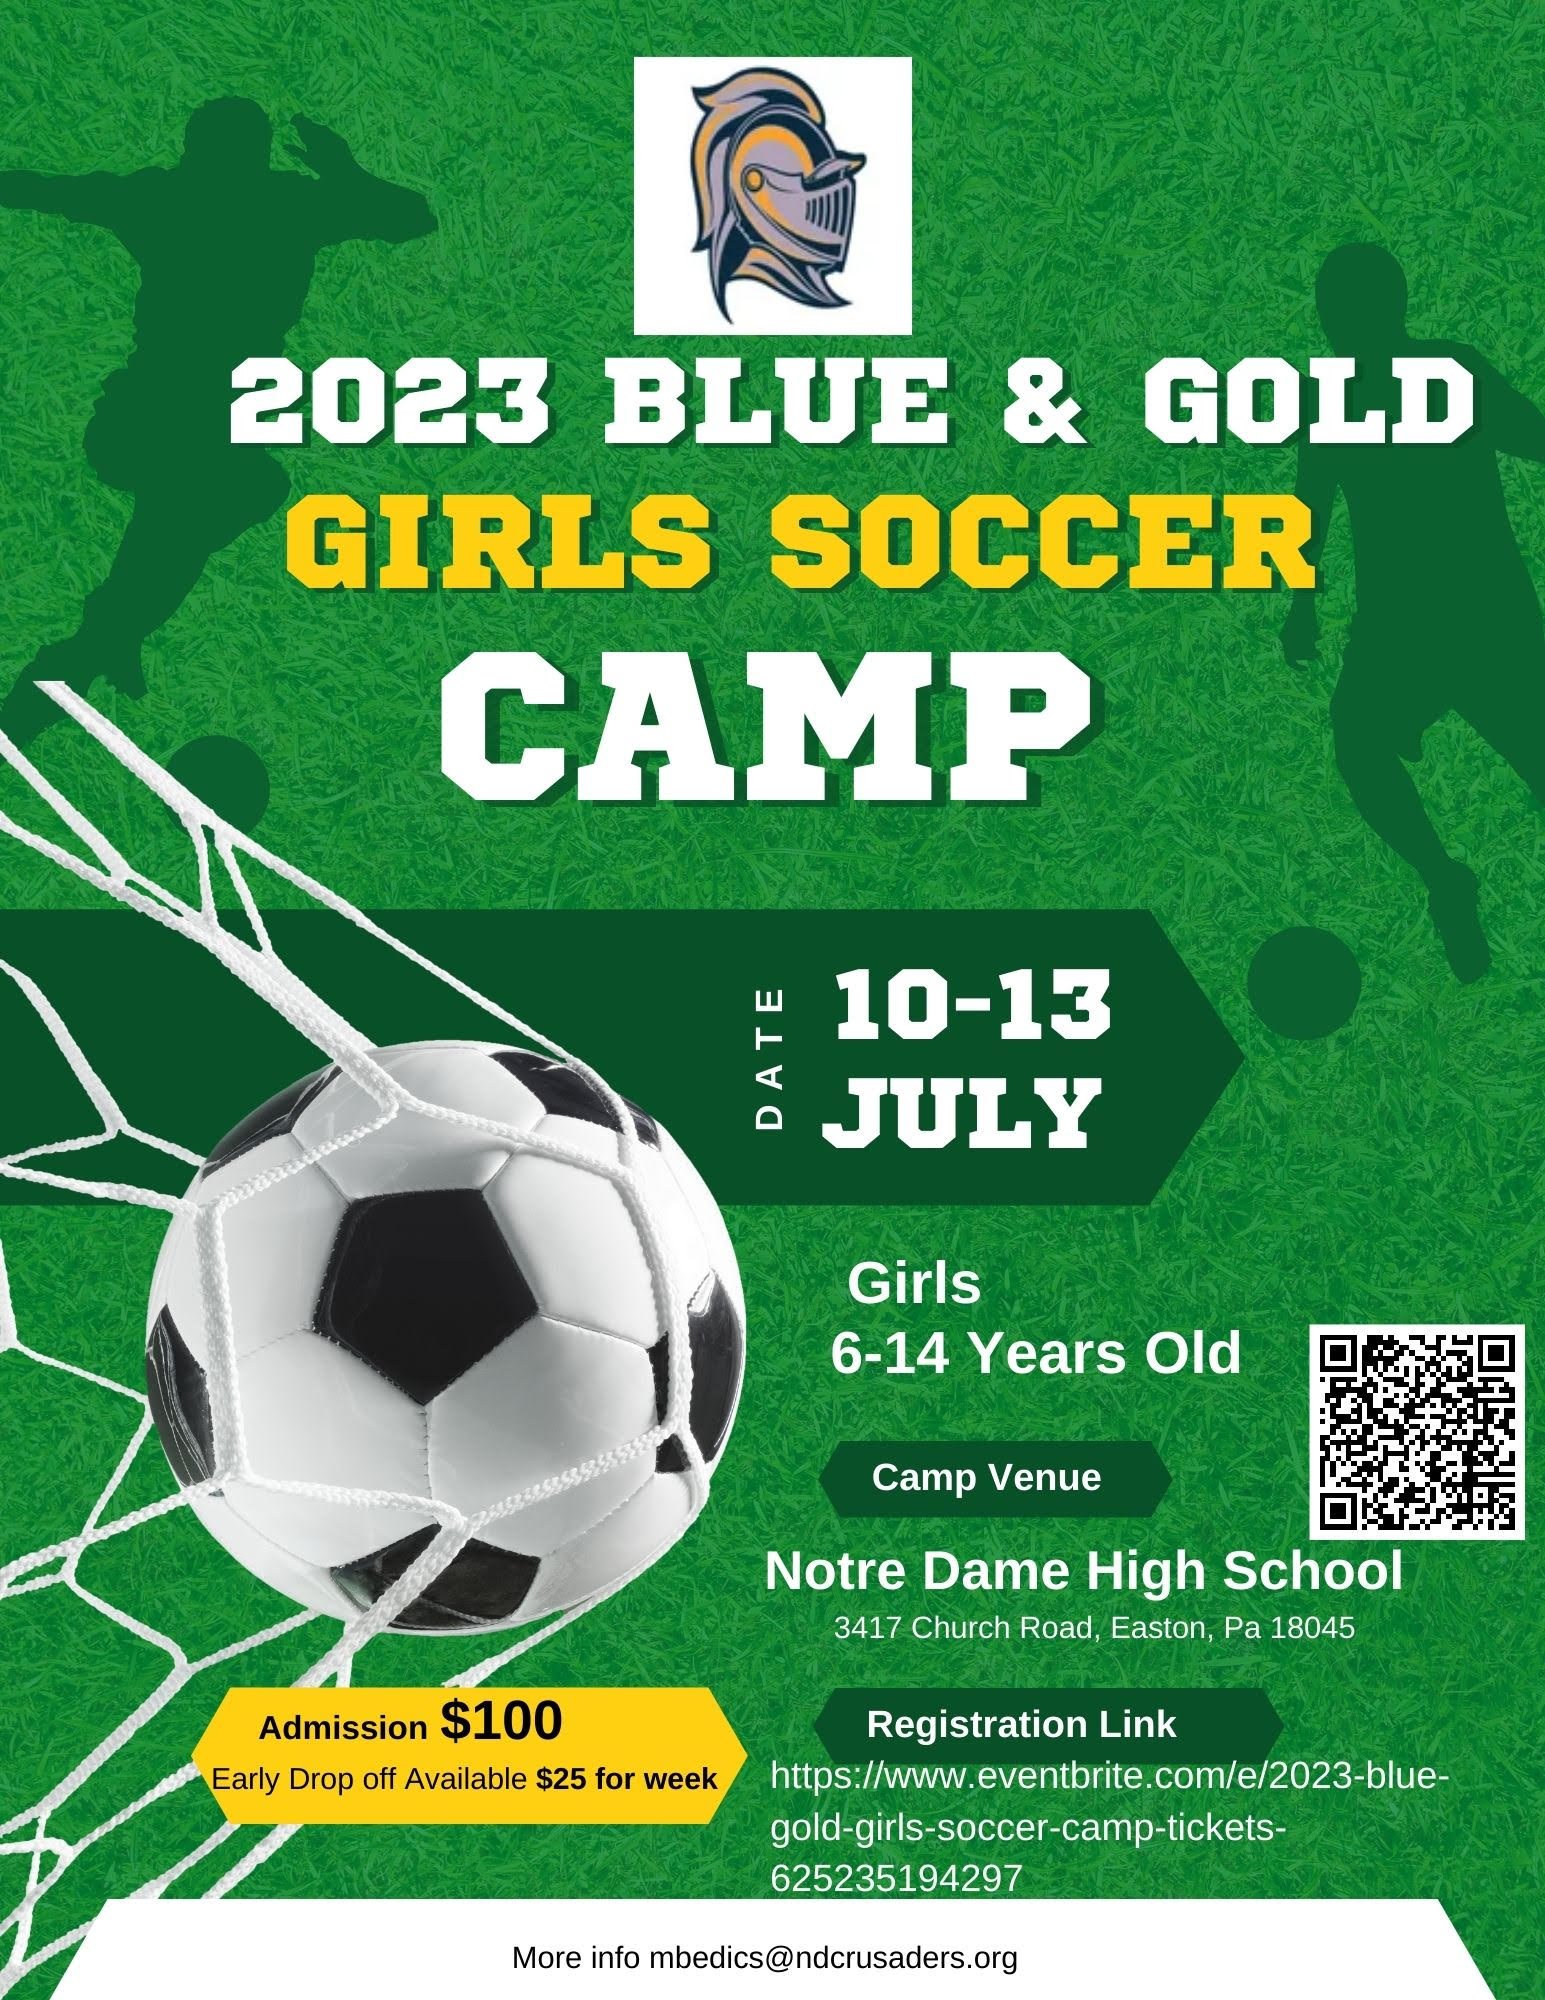 2023 Girls Soccer Came at ND